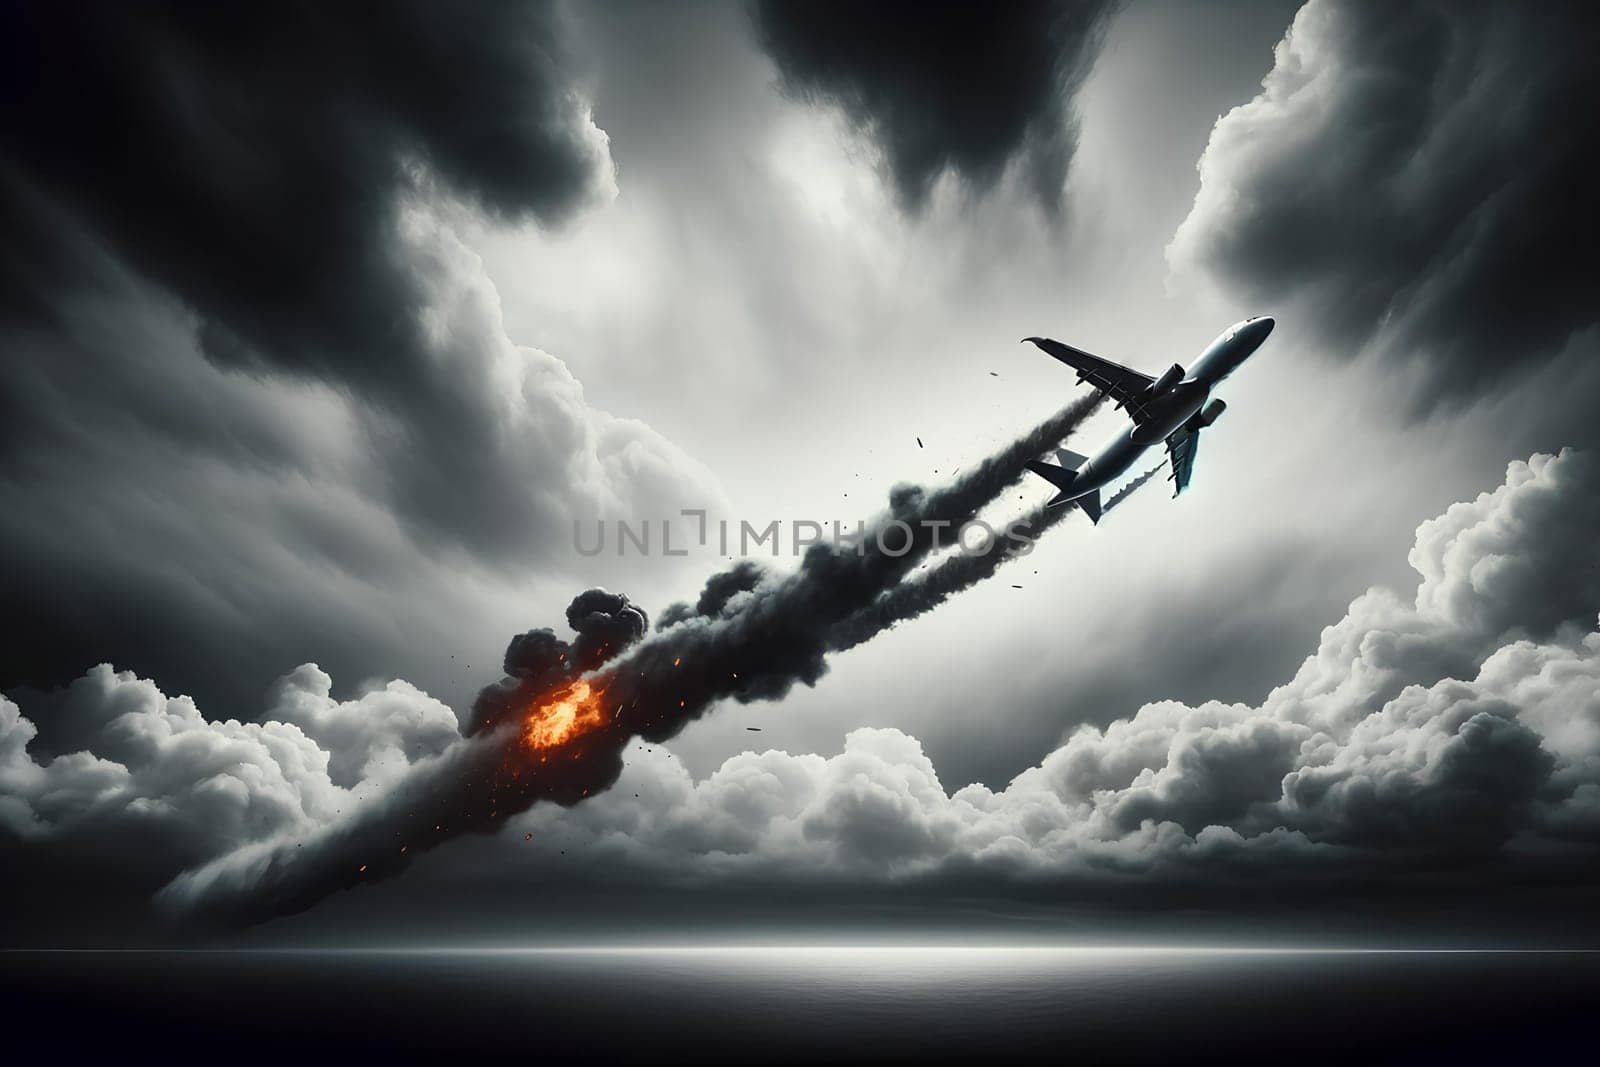 plane crash, plane falling from the sky with thick black smoke from engines against dramatic sky by Annado